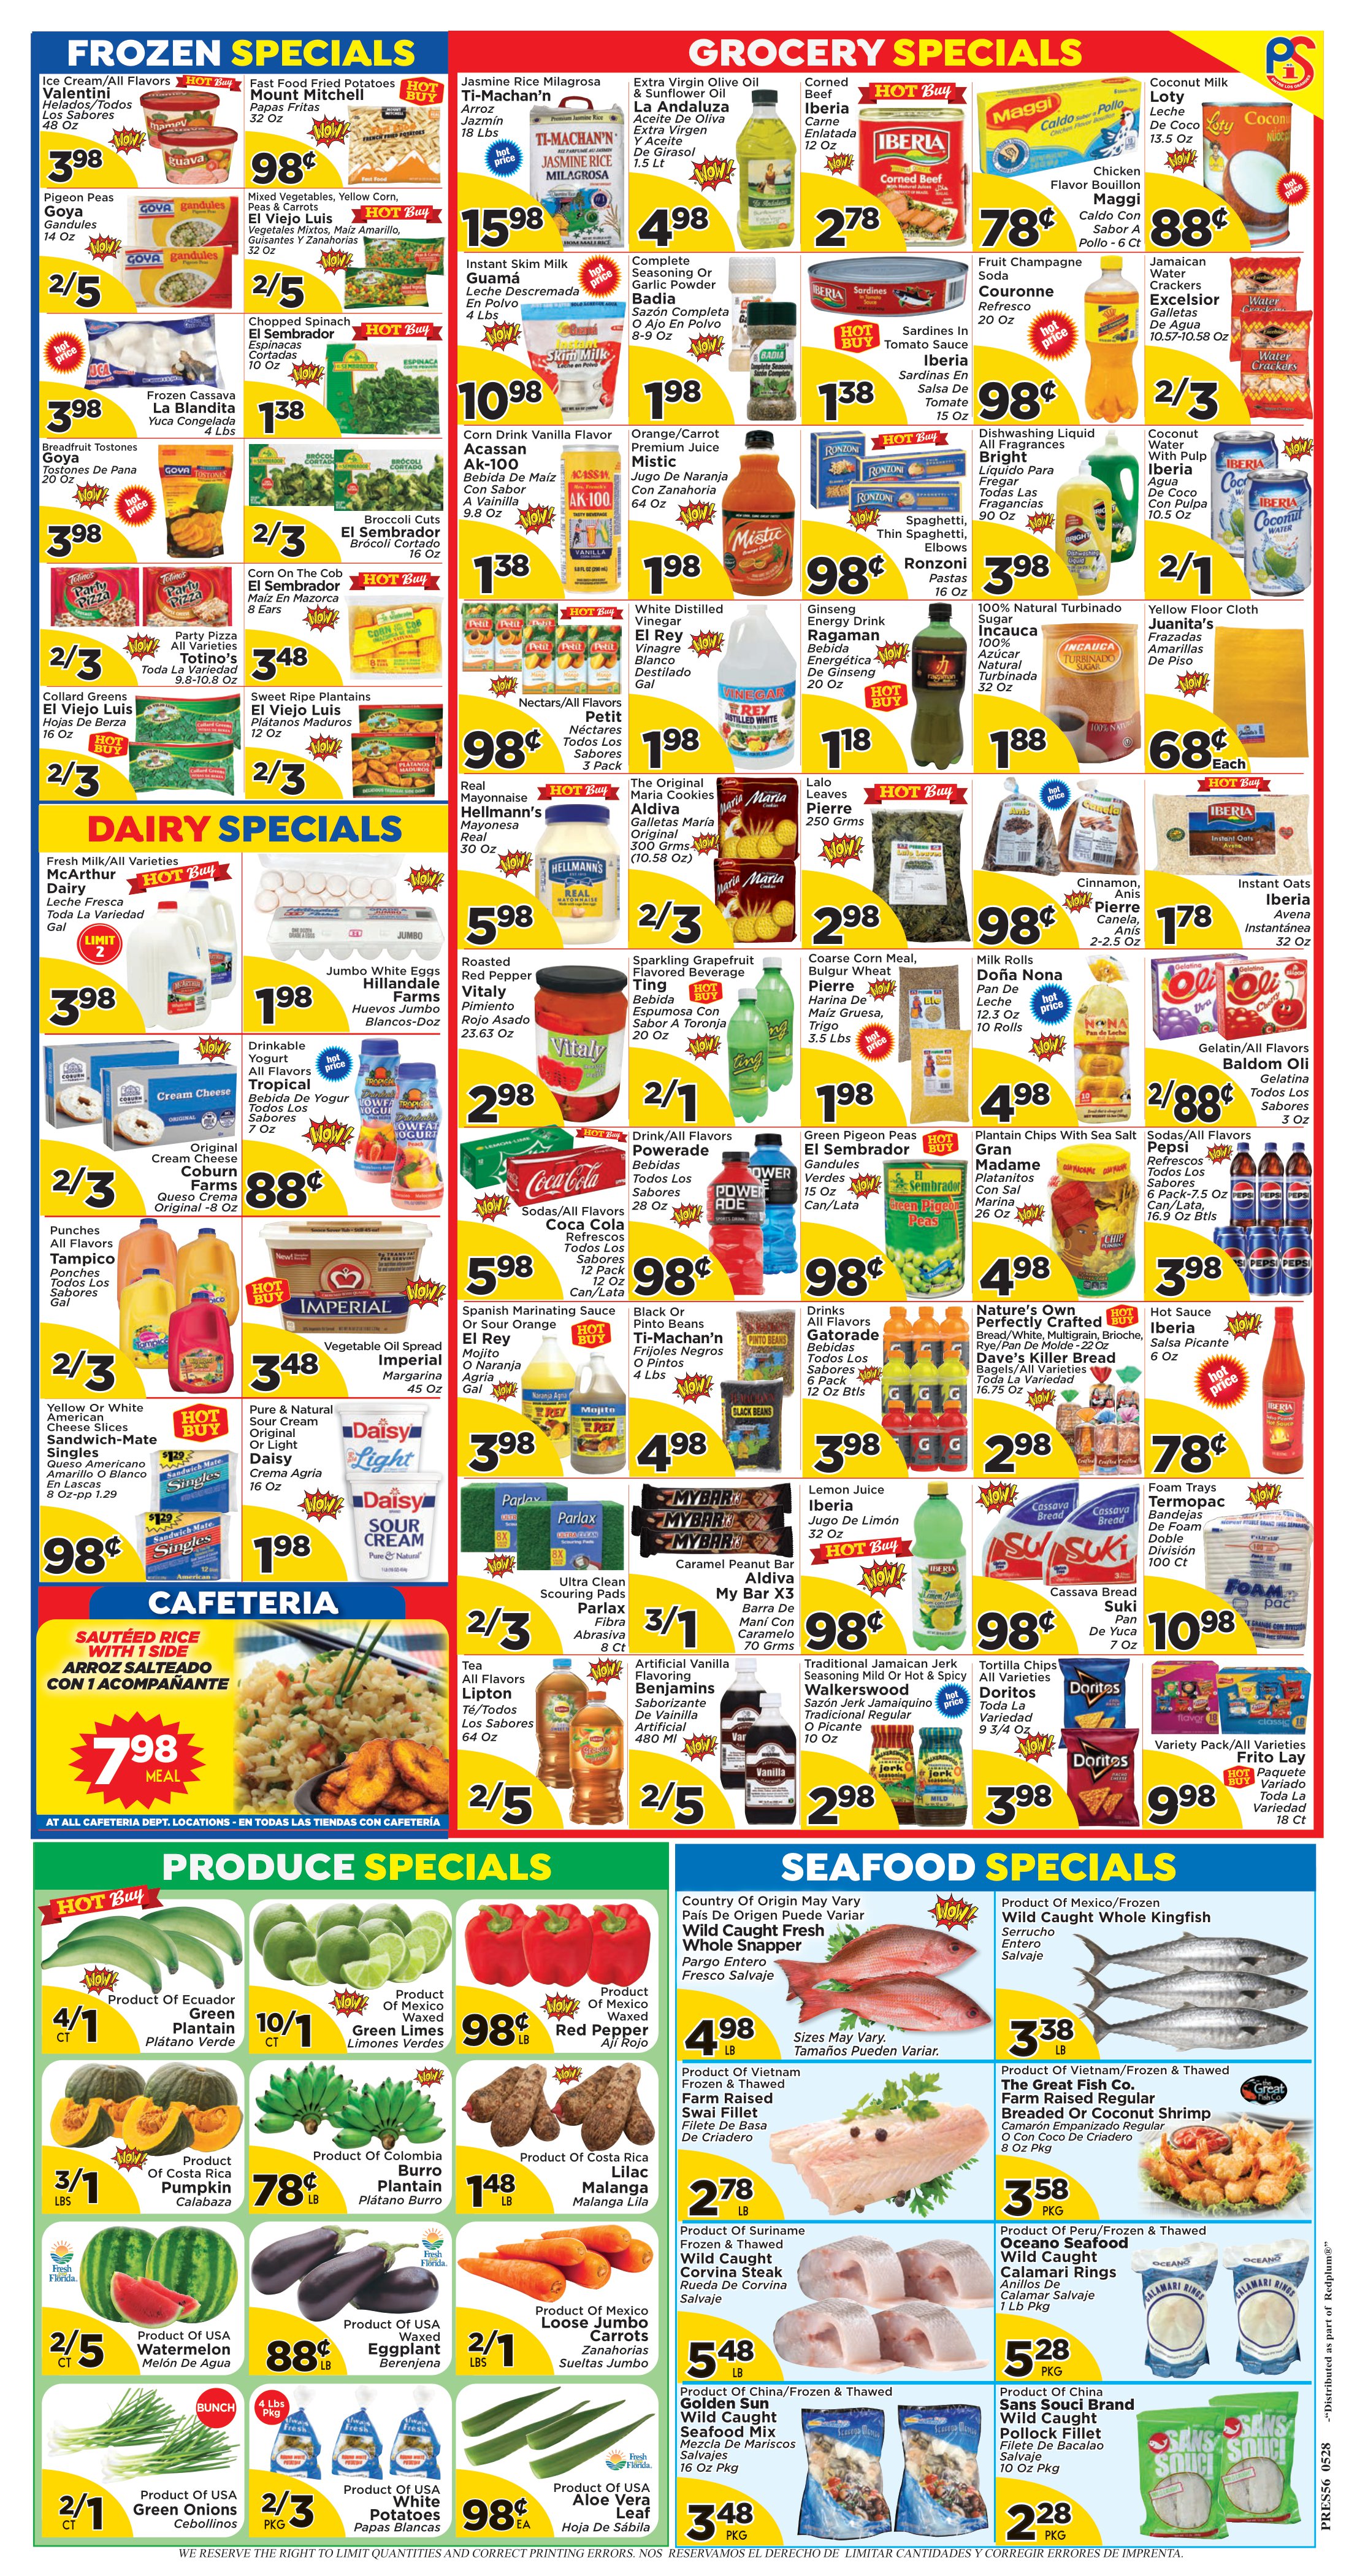 Presidente Supermarket - Weekly Promo for Store 56 - Page 2